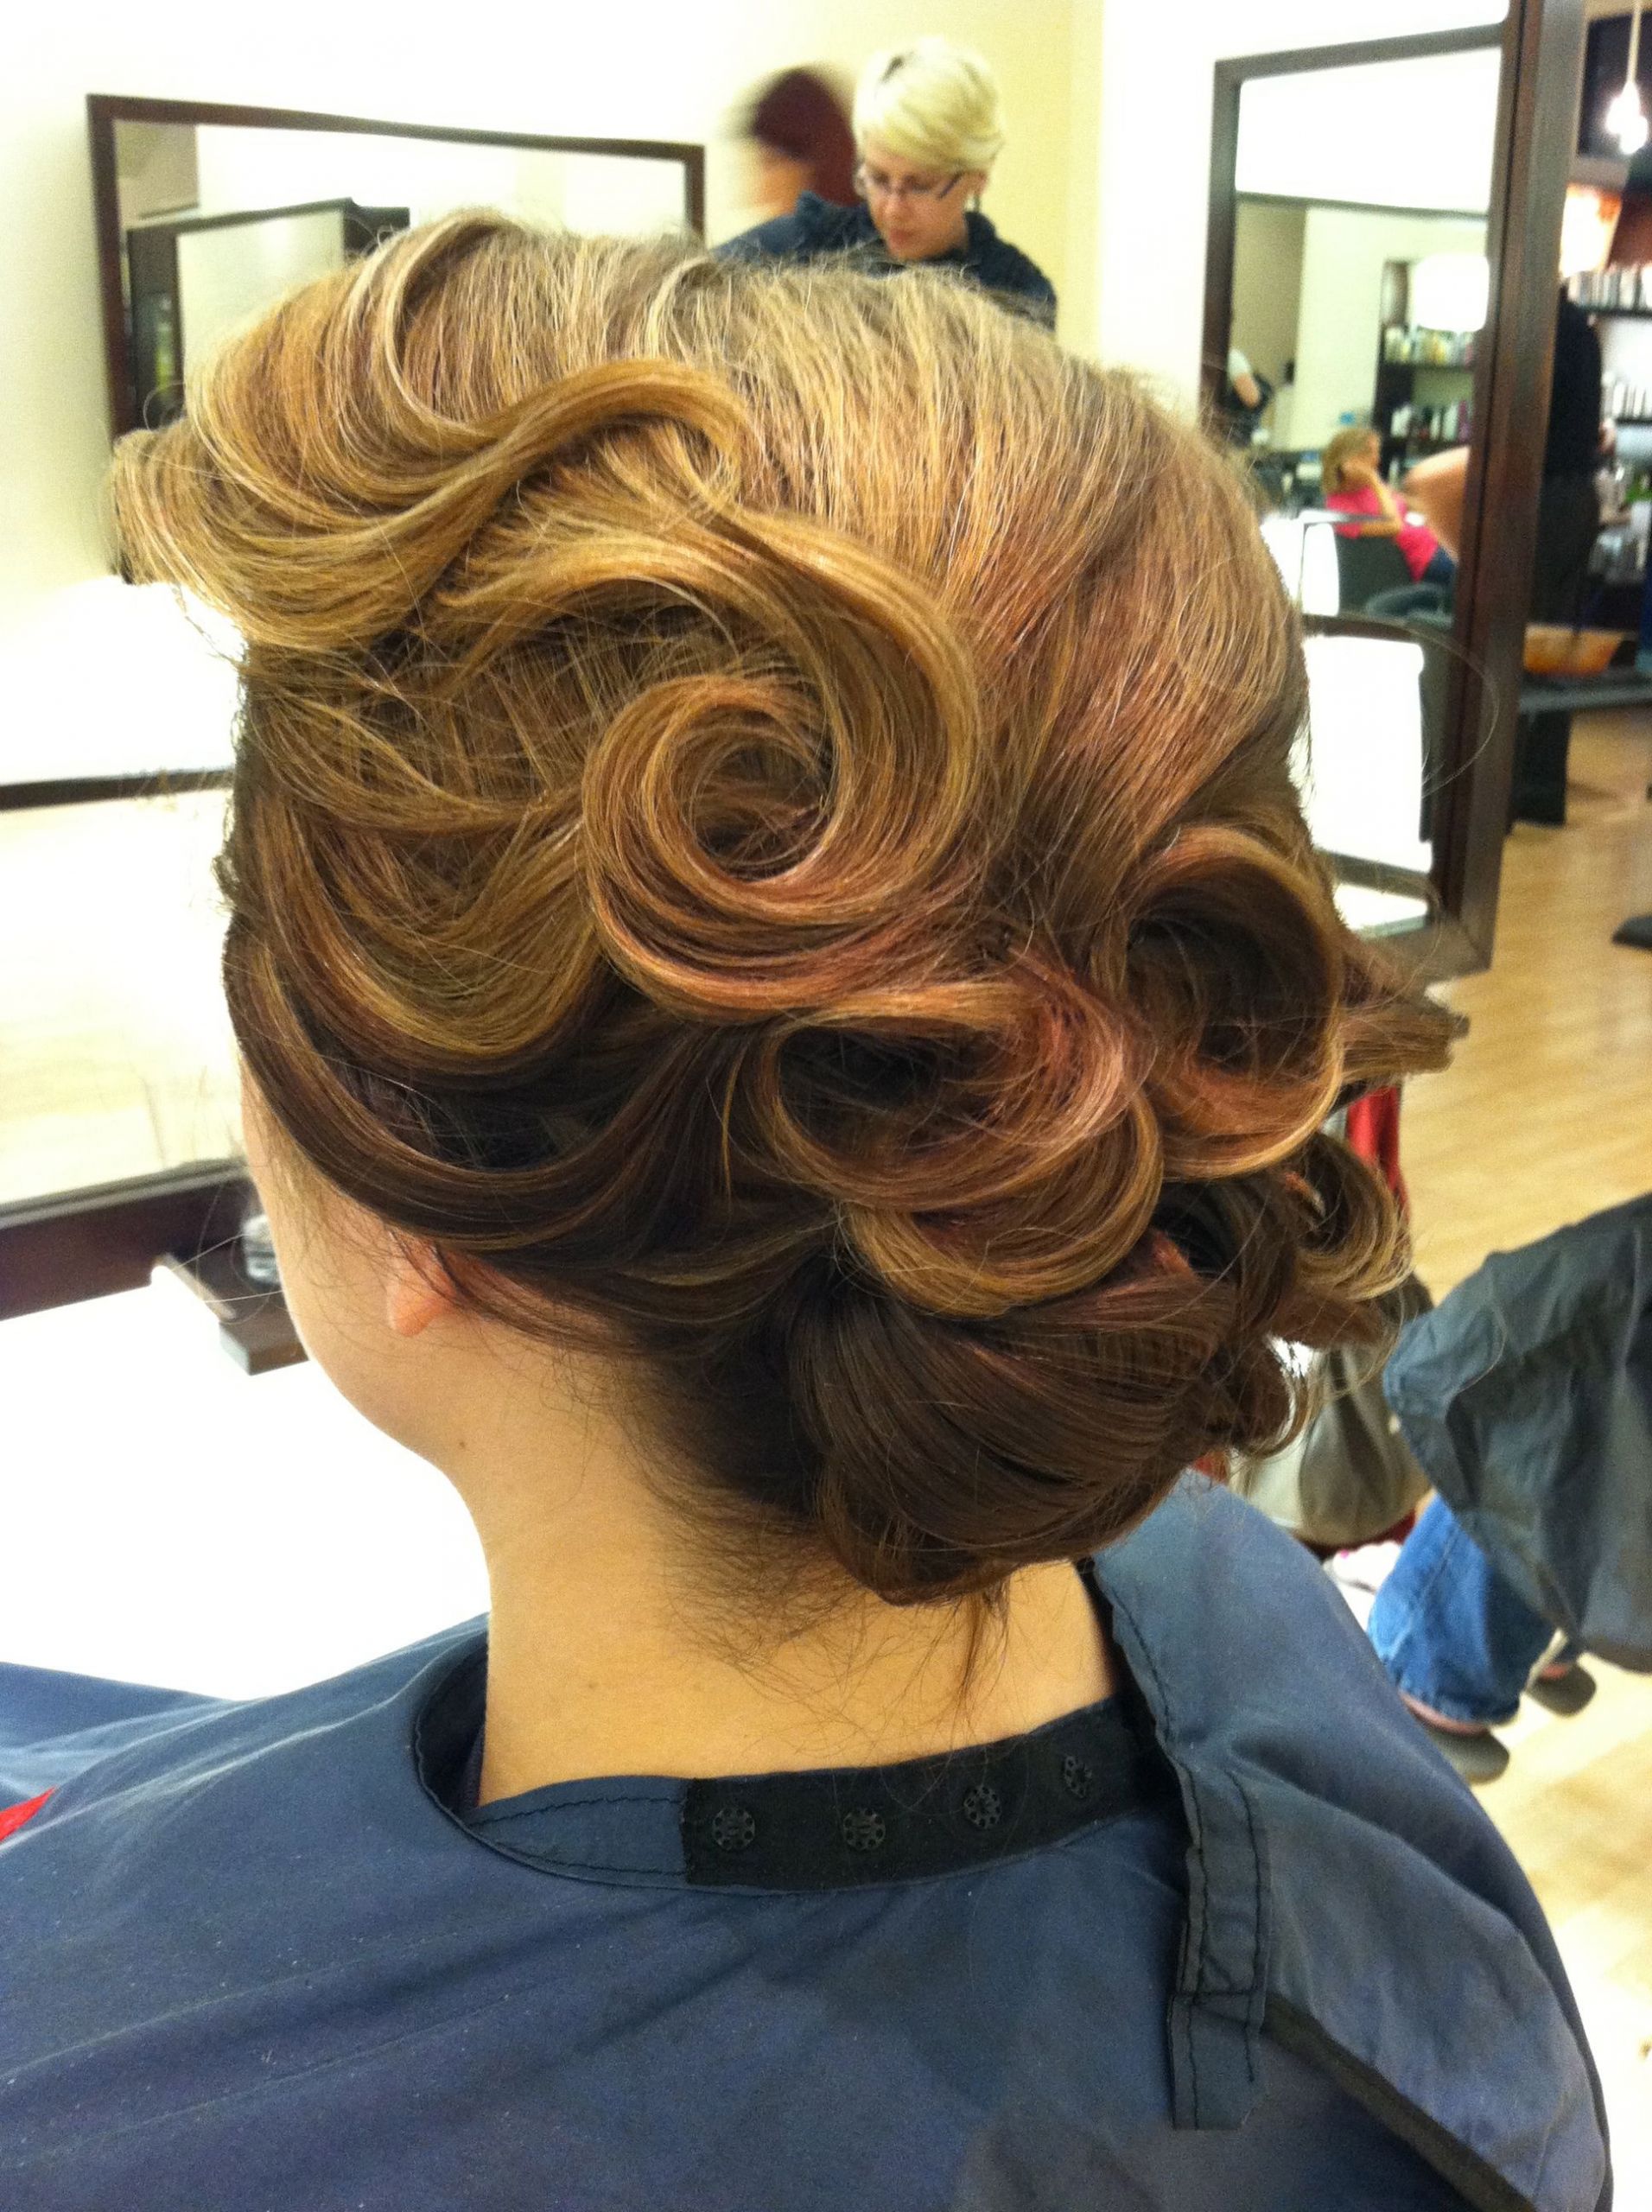 40s Wedding Hairstyles
 Fun 40 s style inspired updo on bride So much fun to do